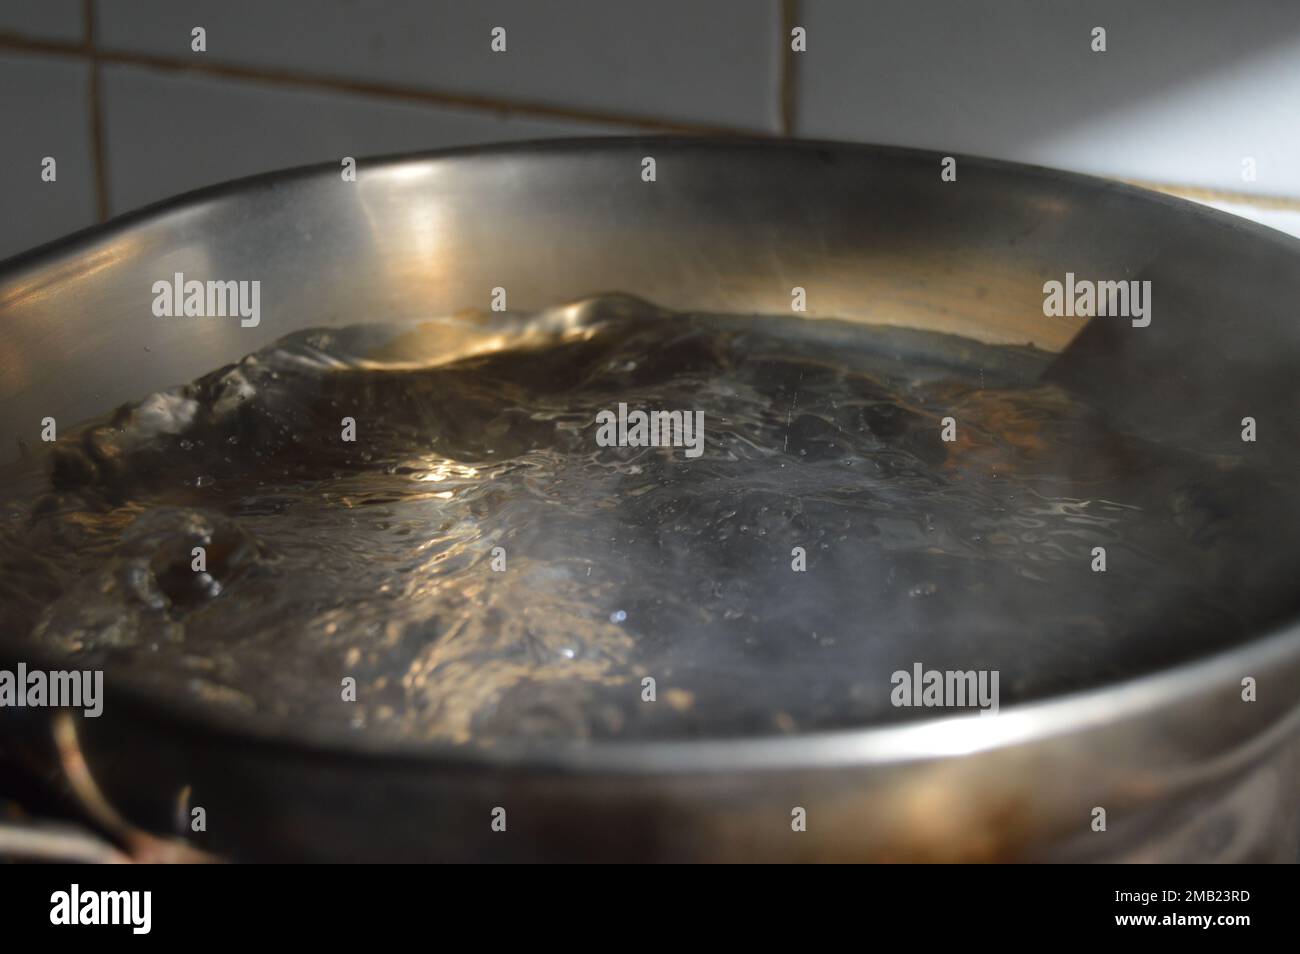 Portrait of boiling water in a boiling pot. Stock Photo